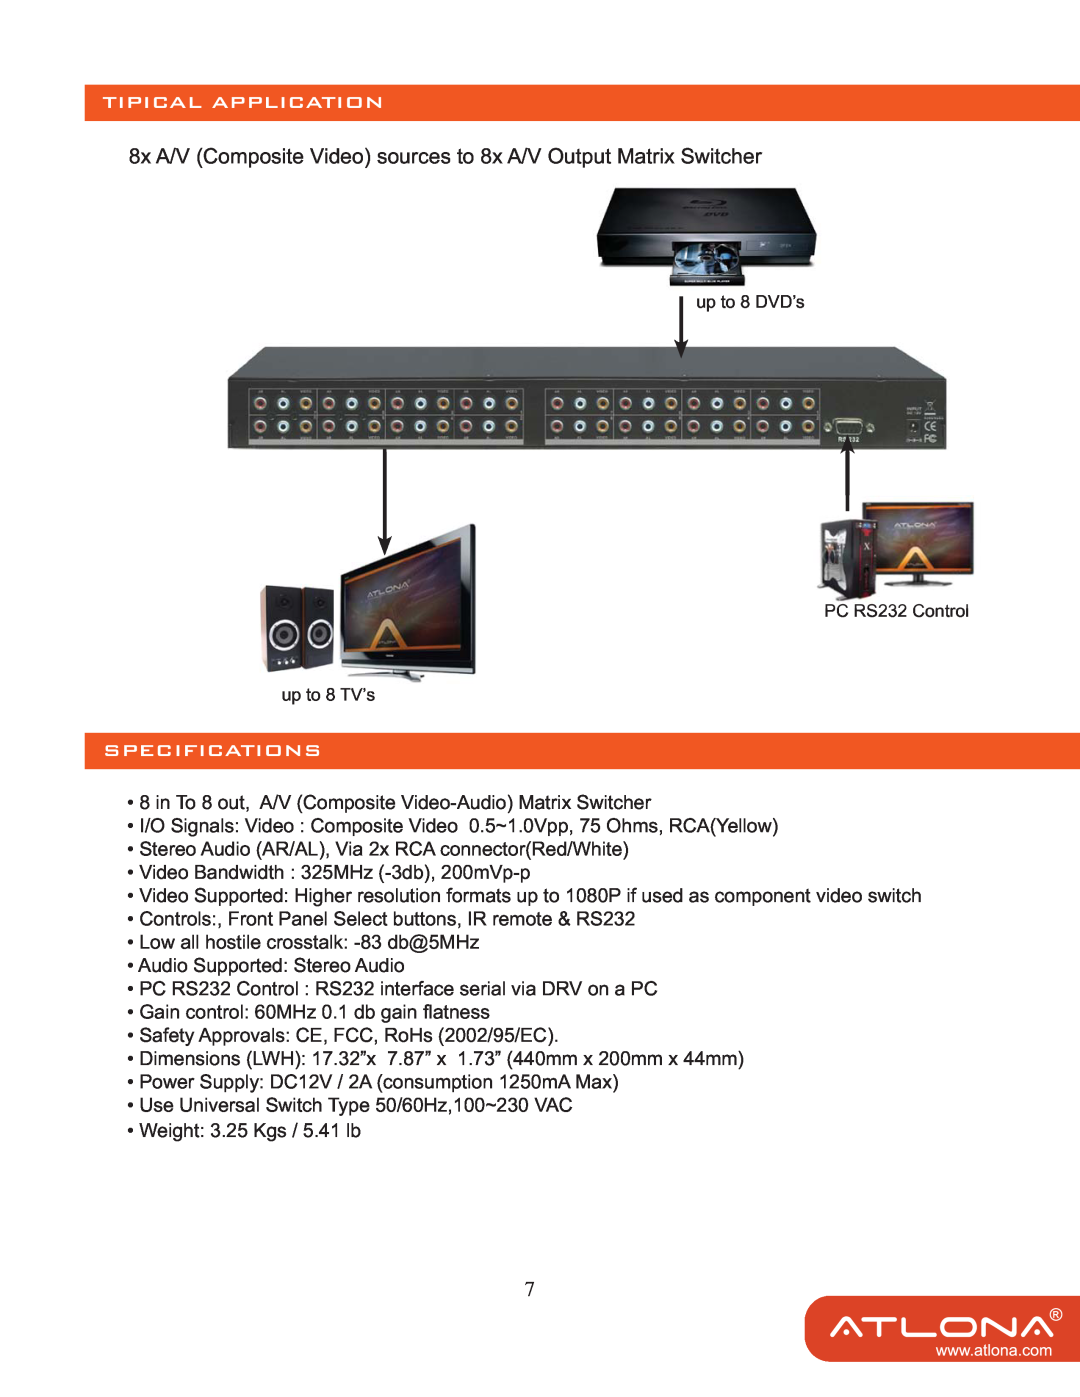 Atlona AT-AV0808N user manual Tipical Application, Specifications, up to 8 DVD’s PC RS232 Control up to 8 TV’s 